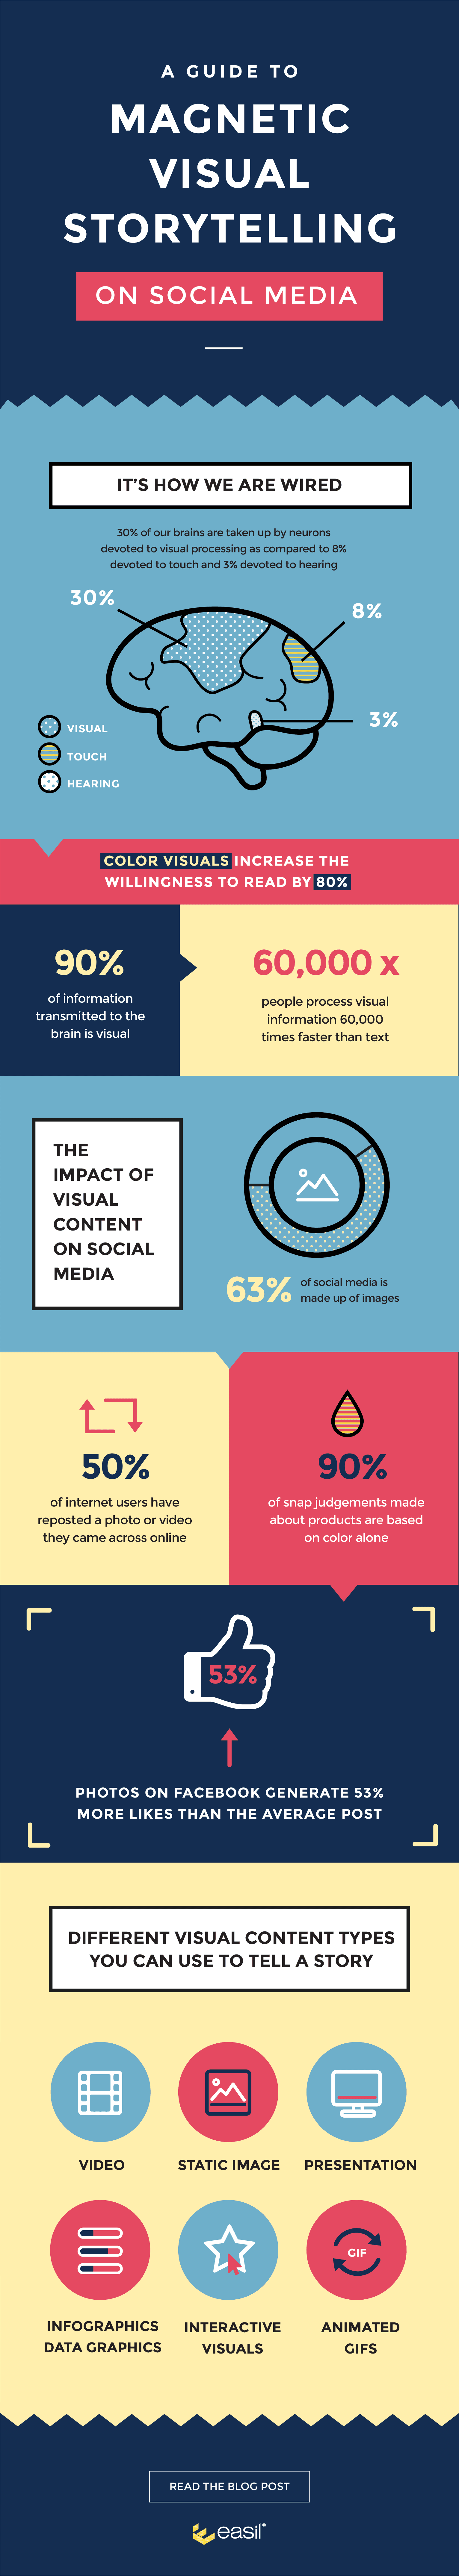 Visual story on social media Infographic